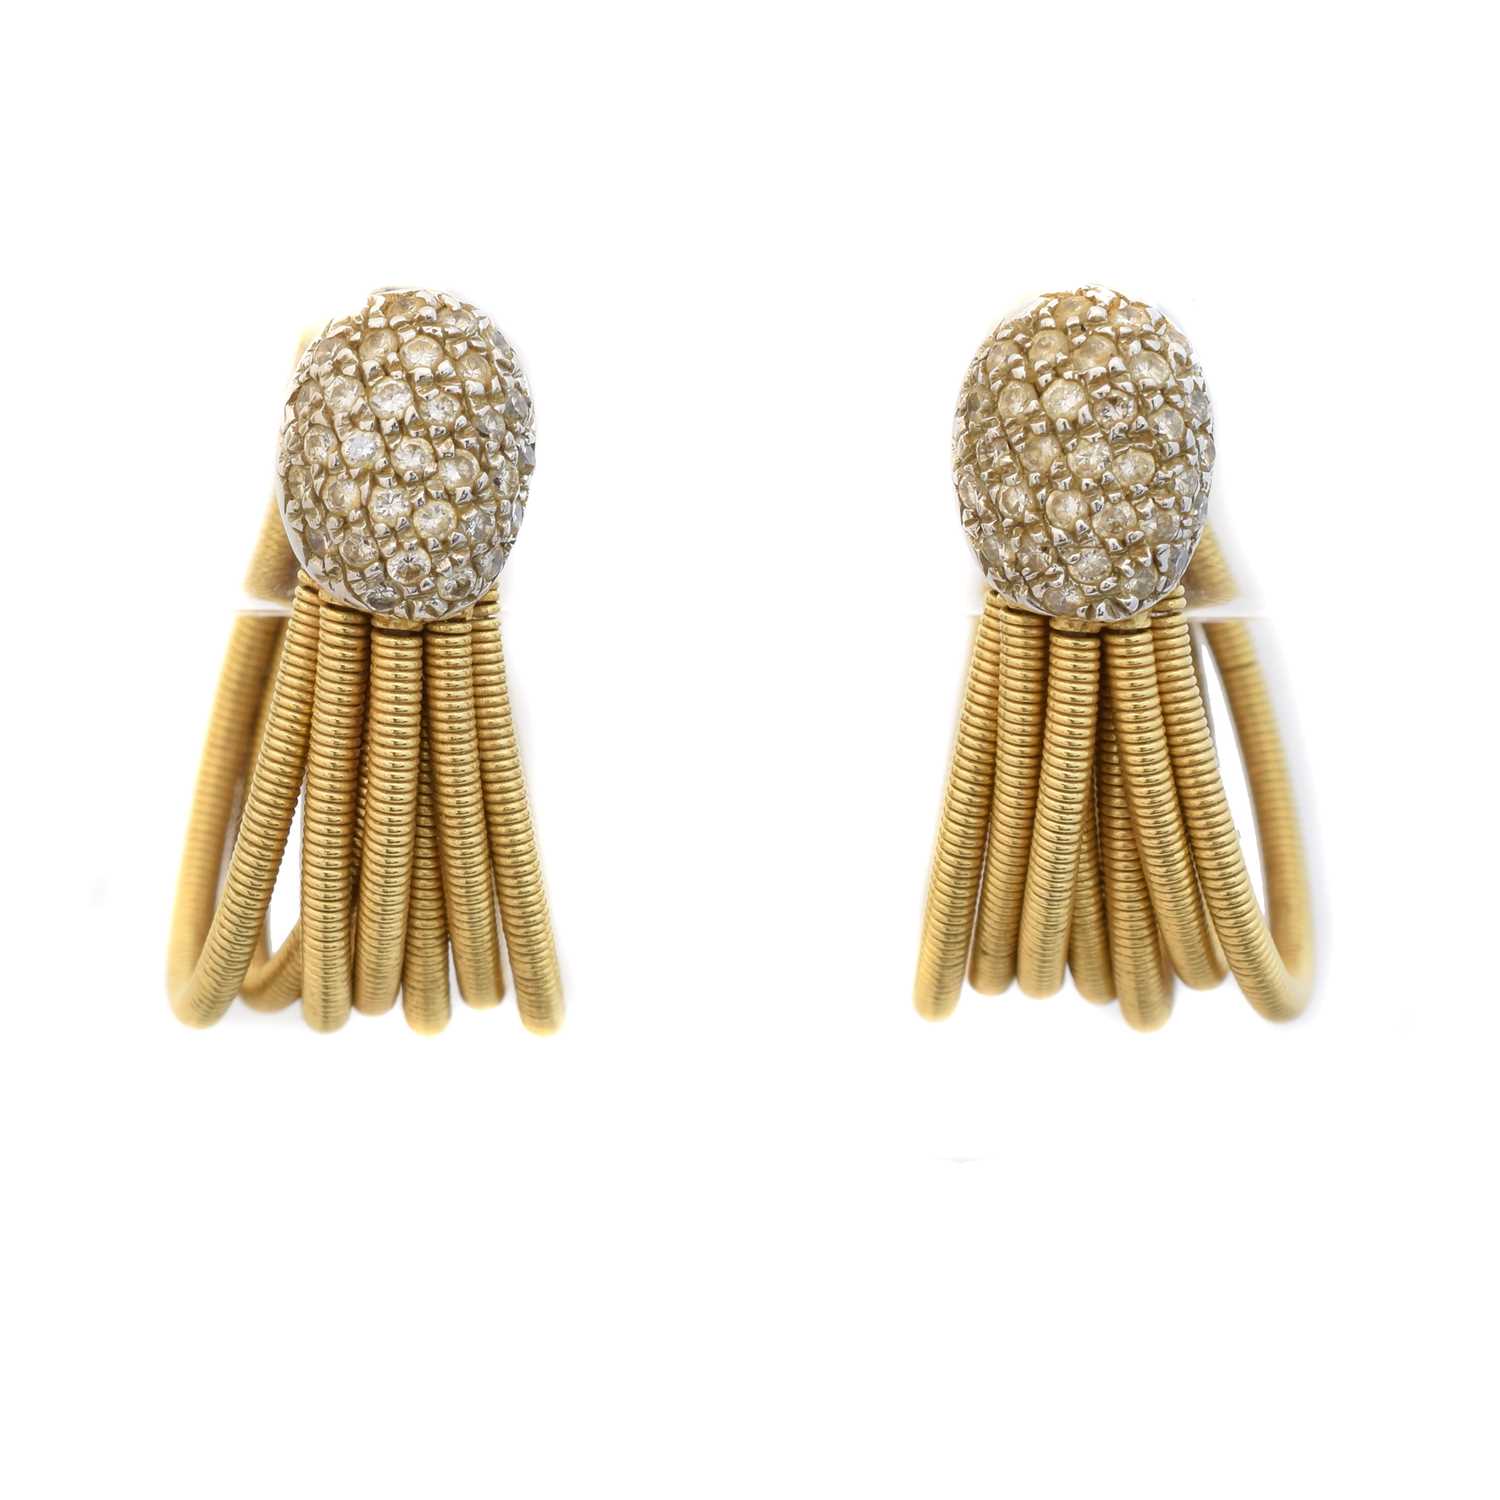 Lot 13 - A pair of 18ct gold diamond earrings by Marco Bicego